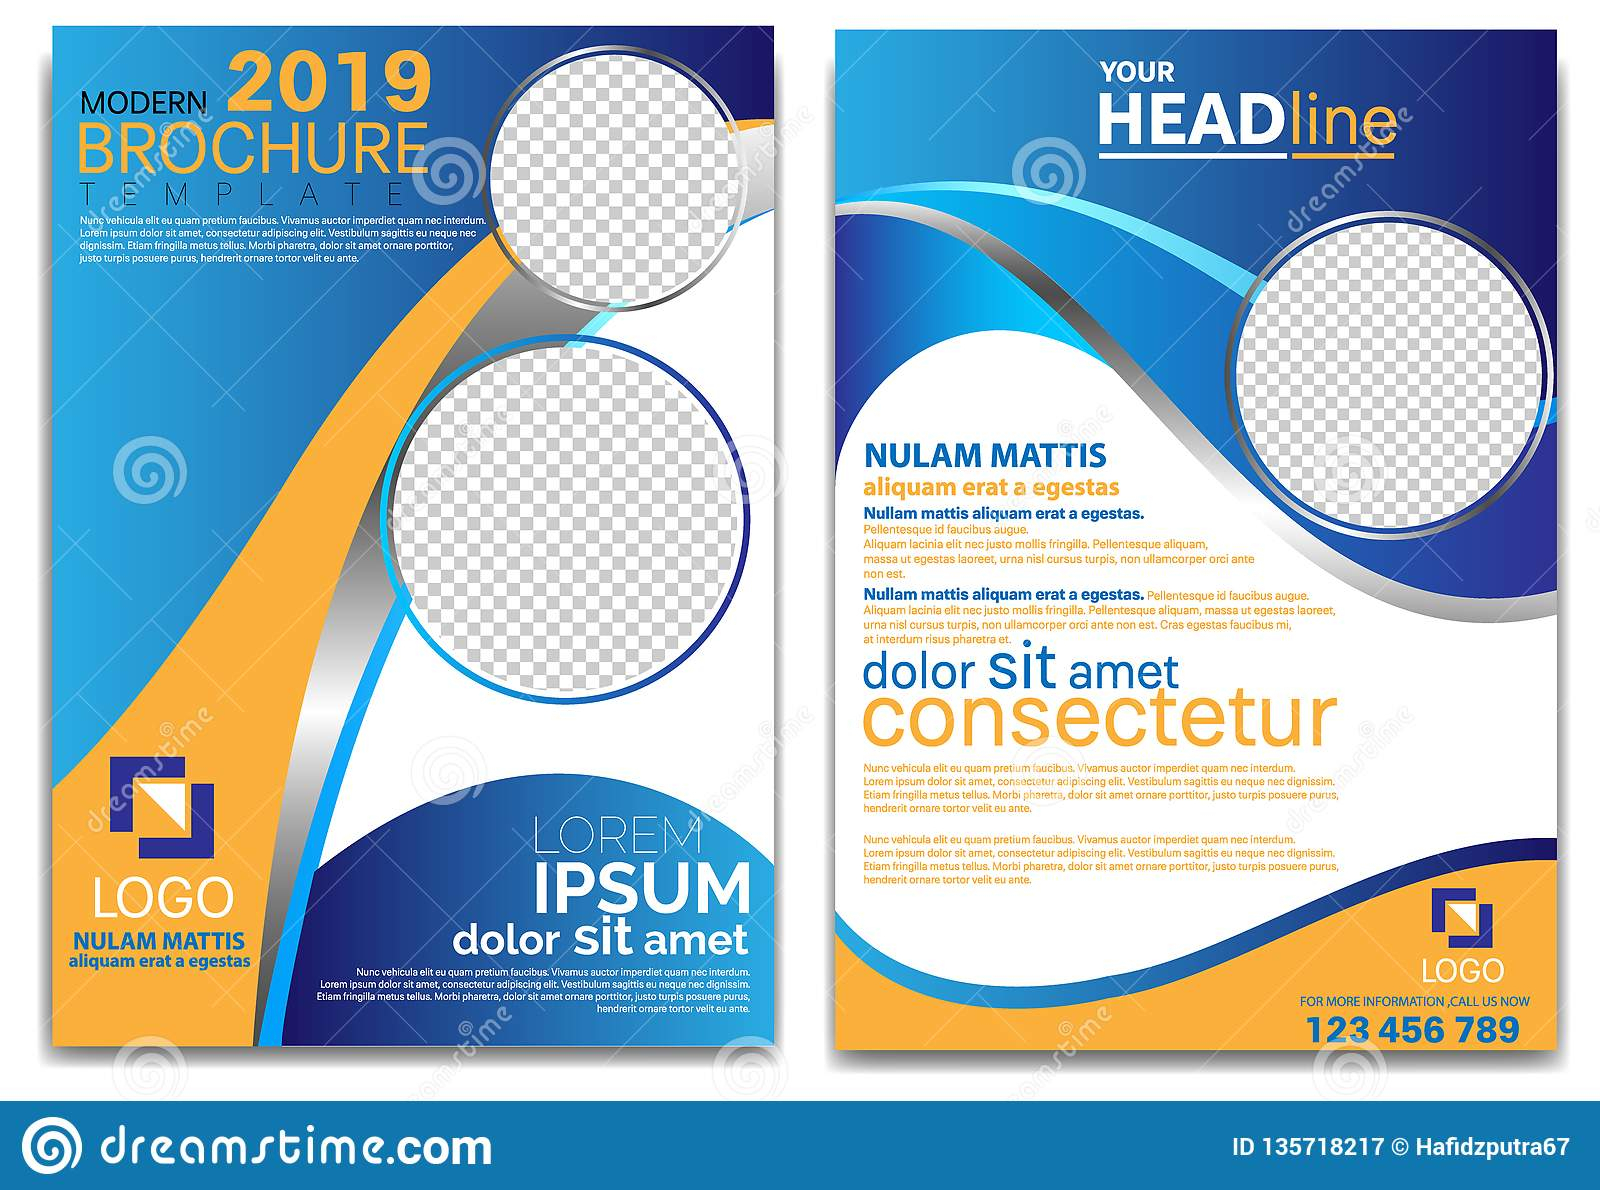 Modern Brochure Template 2019 And Professional Brochure With Regard To Professional Brochure Design Templates